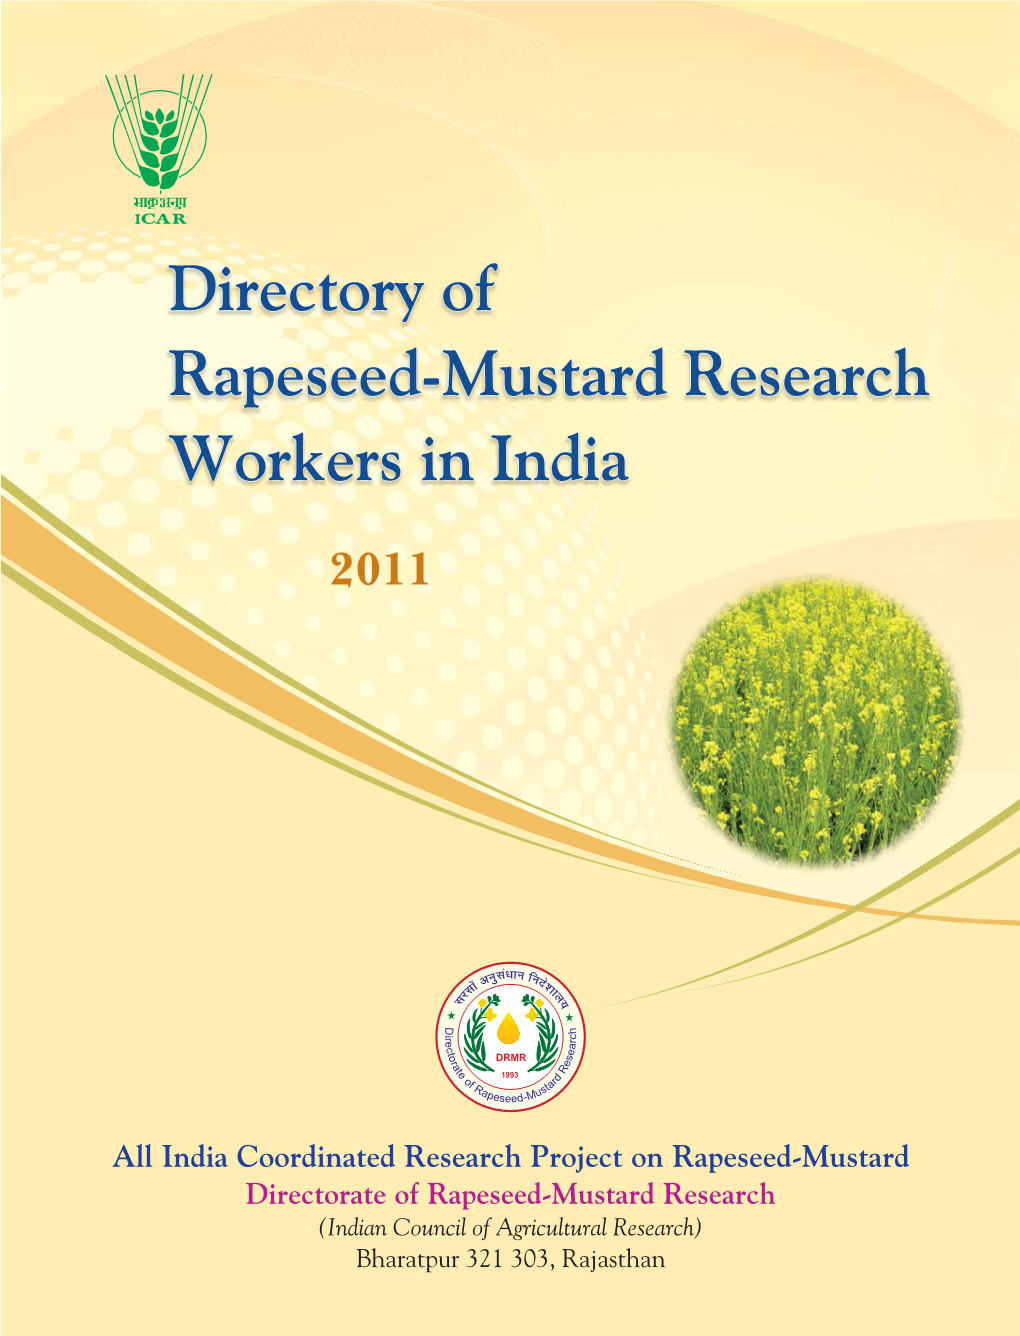 Directory of Rapeseed-Mustard Research Workers in India